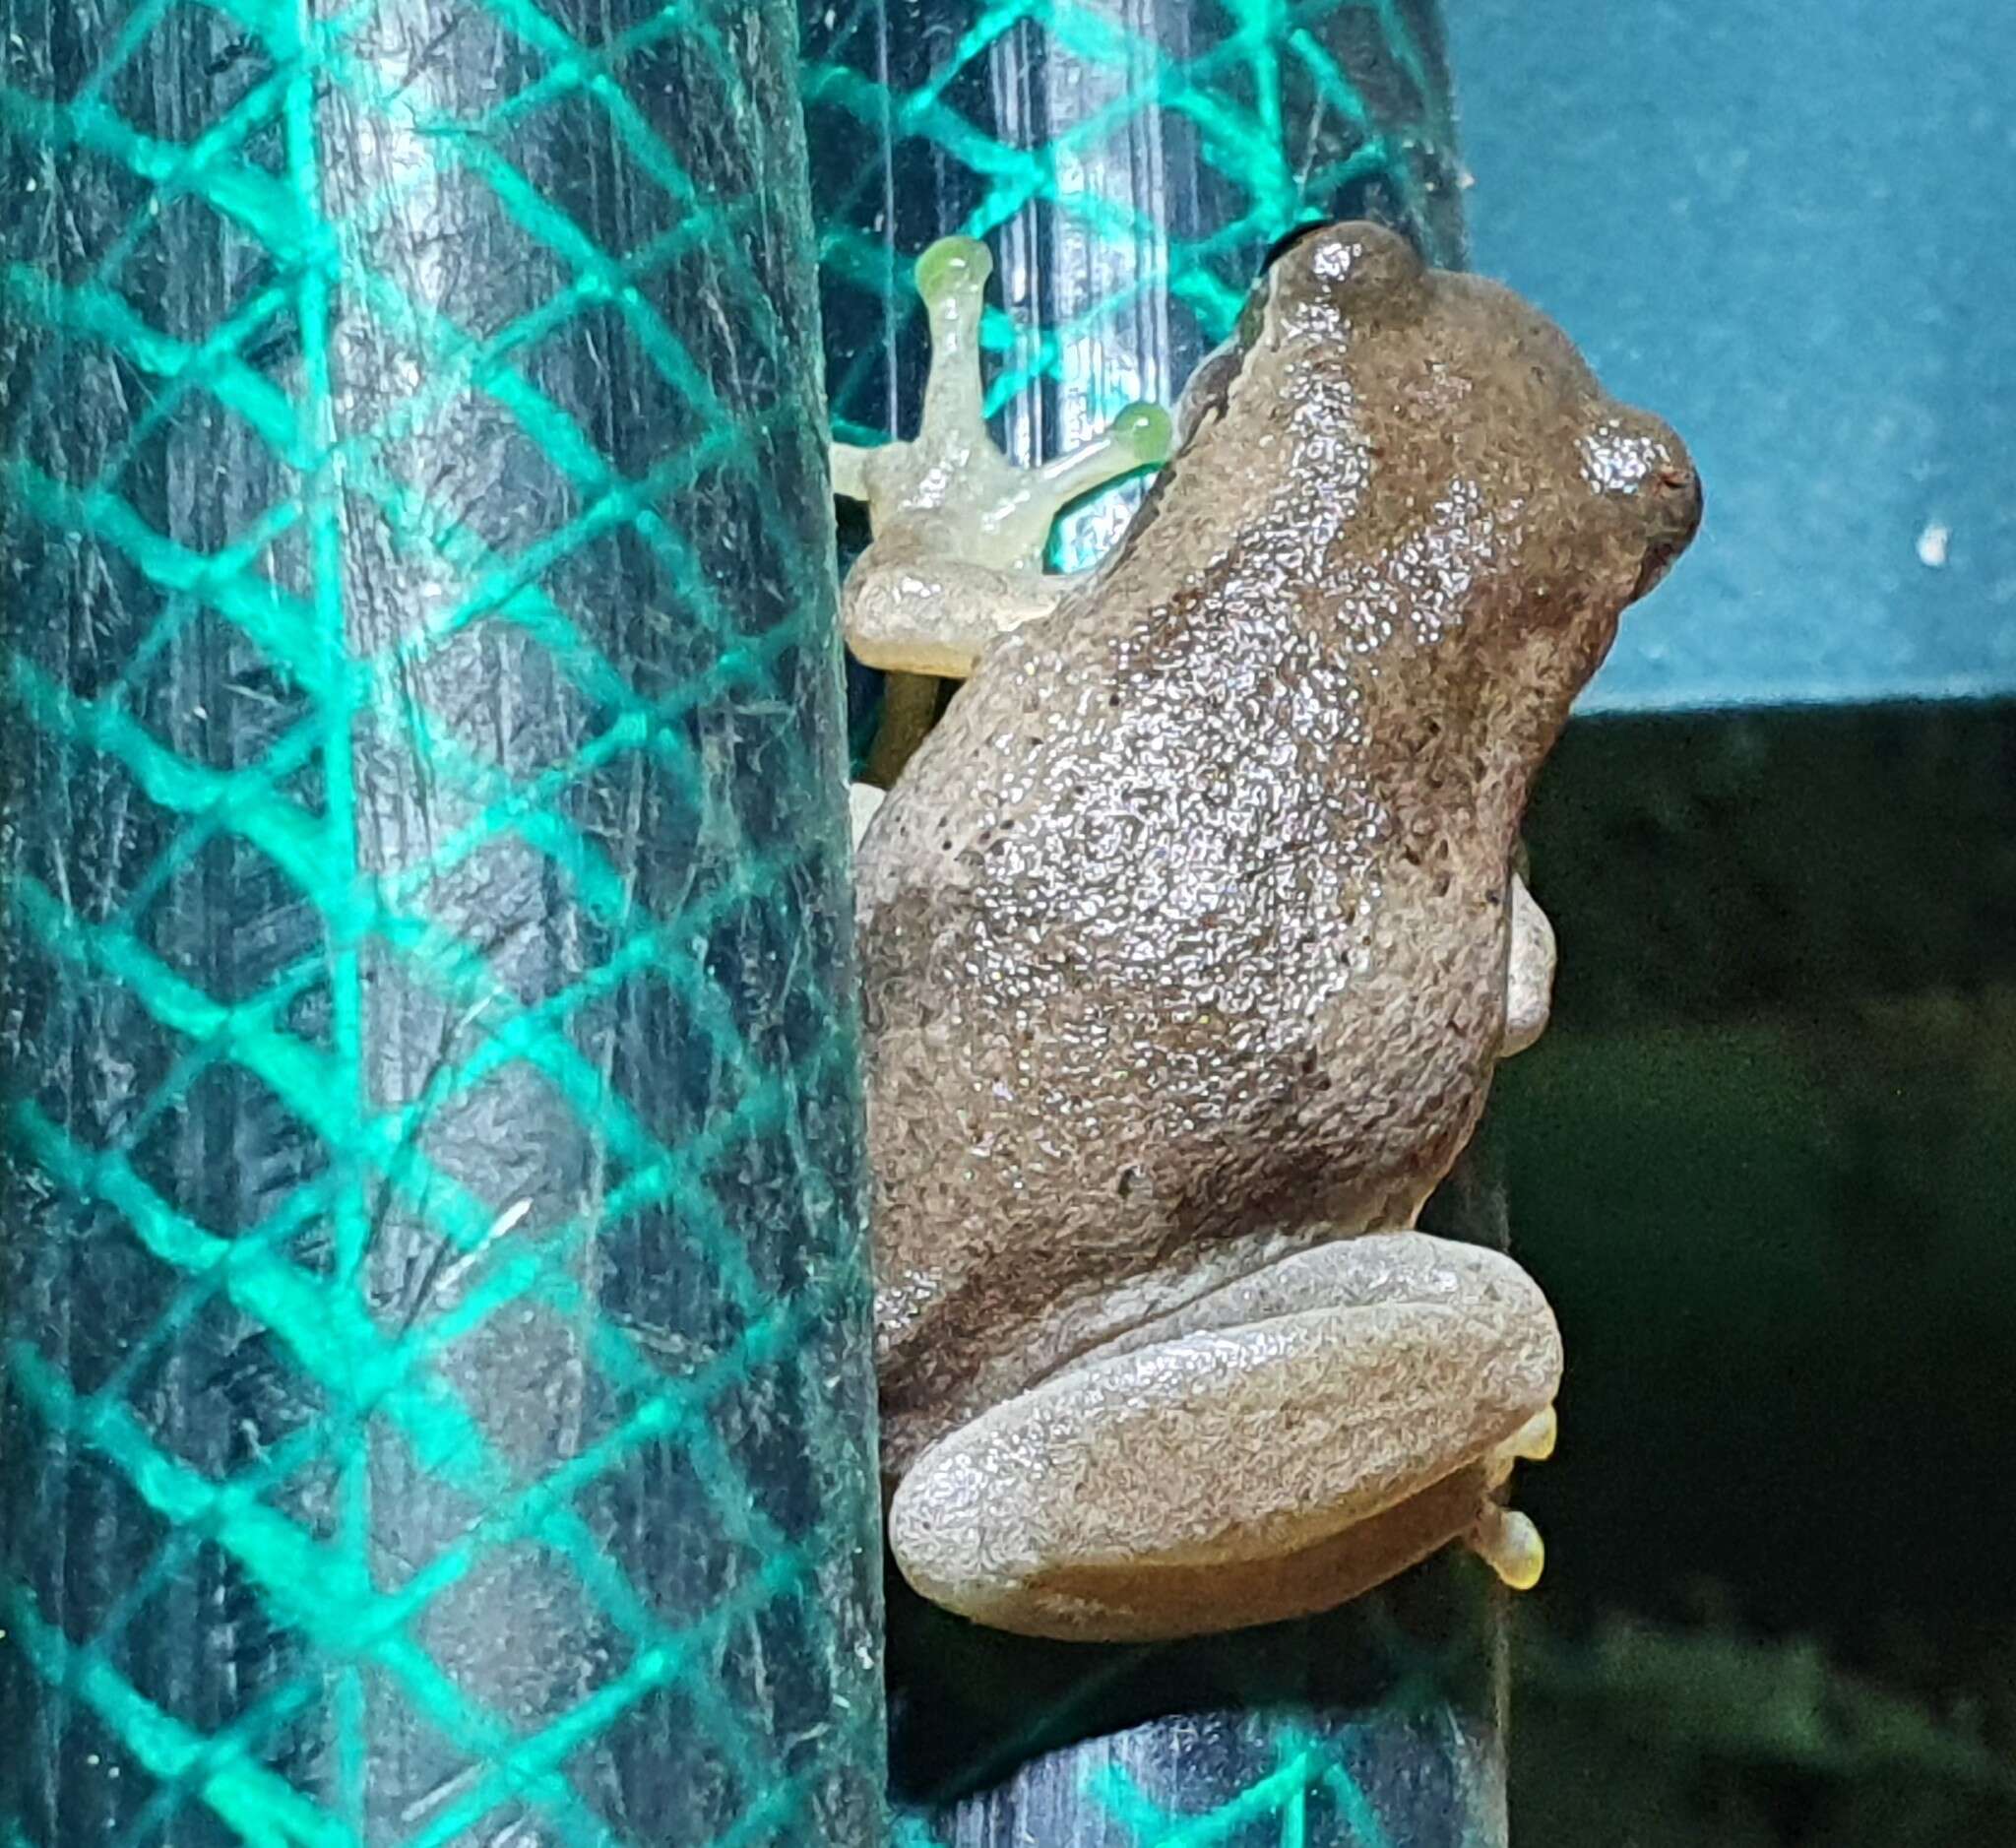 Image of Bleating Tree Frog